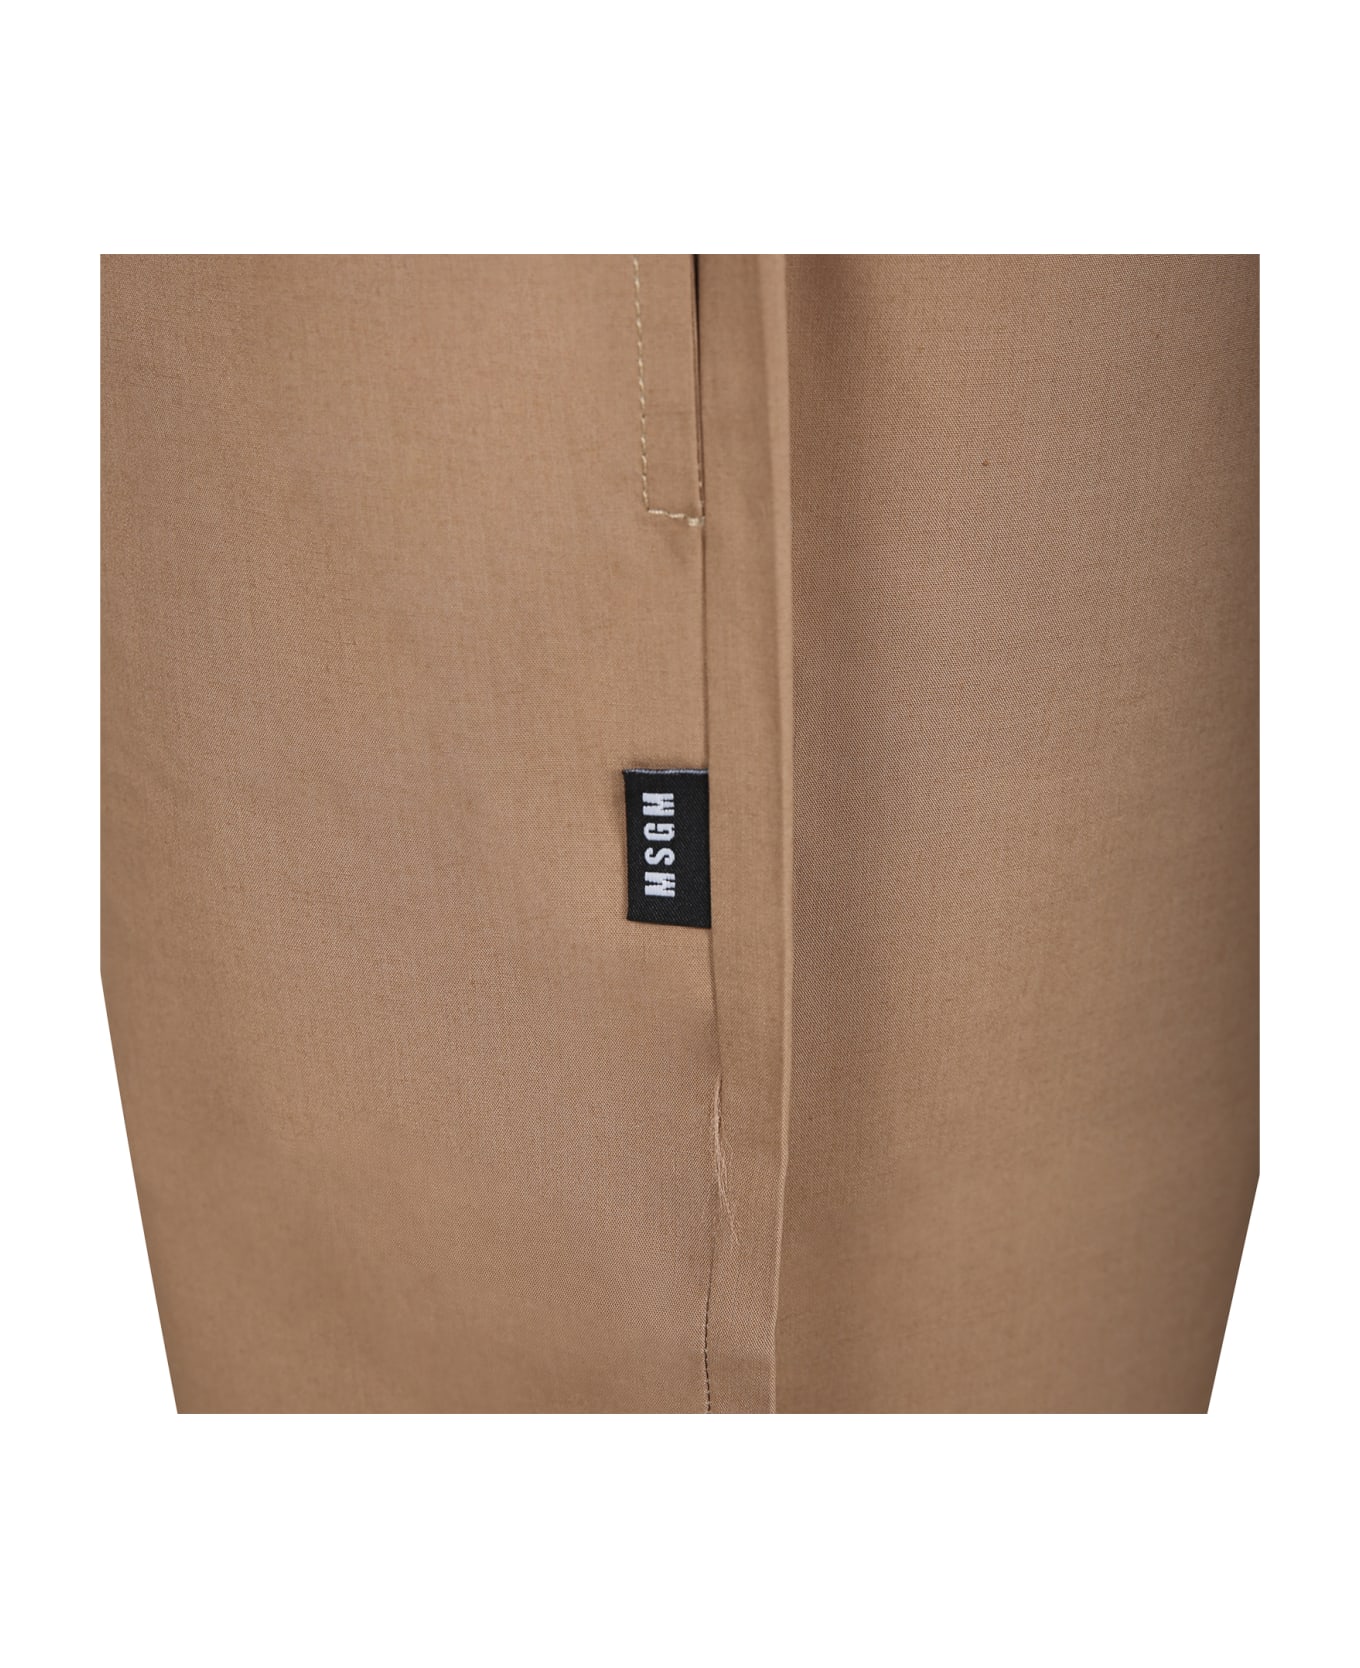 MSGM Brown Trousers For Boy With Logo - Biscotto ボトムス